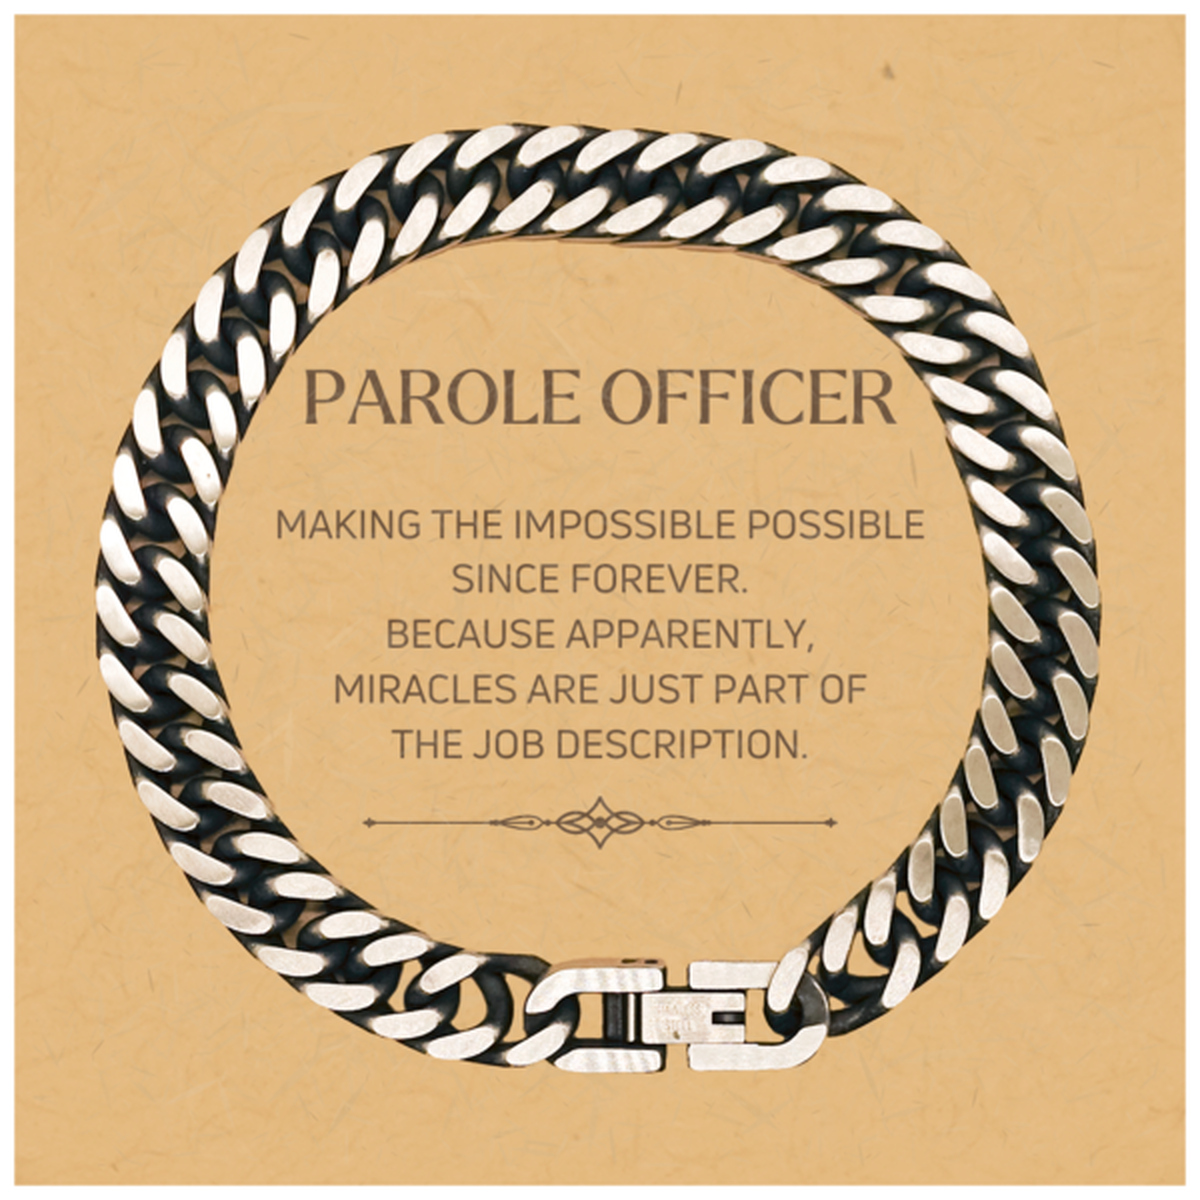 Funny Parole Officer Gifts, Miracles are just part of the job description, Inspirational Birthday Christmas Cuban Link Chain Bracelet For Parole Officer, Men, Women, Coworkers, Friends, Boss